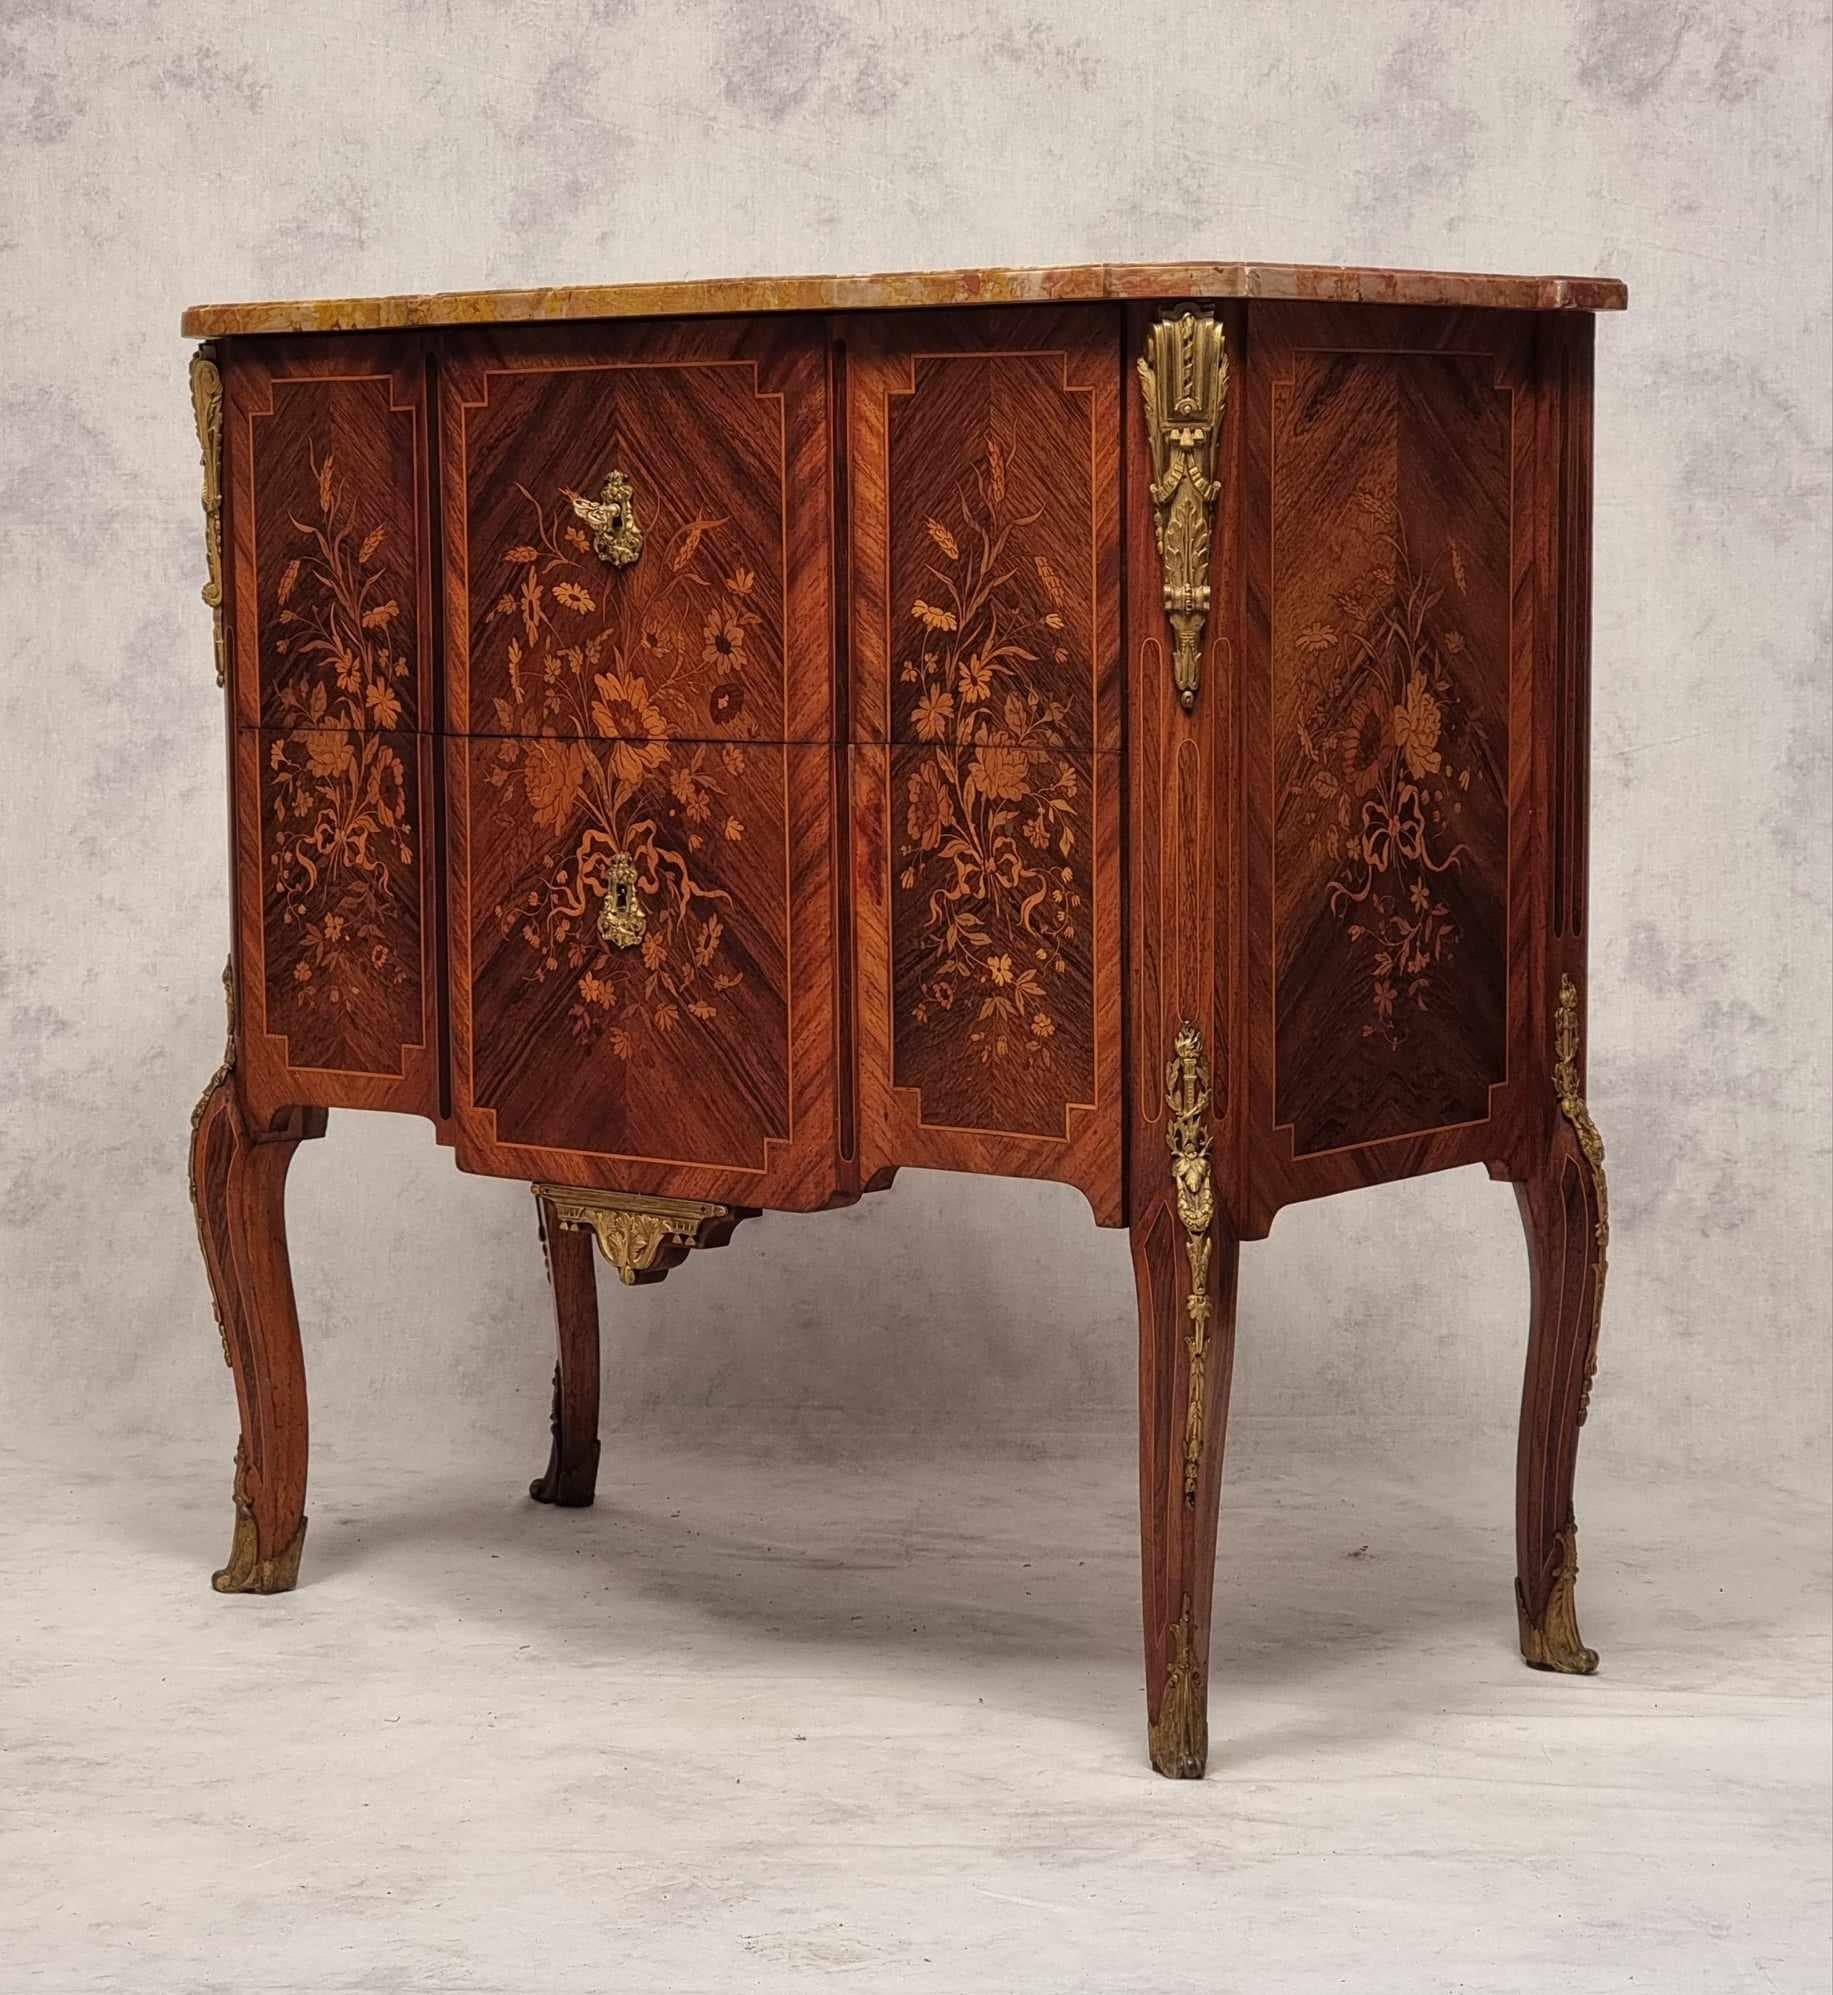 Transition Style Commode Napoleon III Period - Floral Marquetry - Rosewood - 19t 1